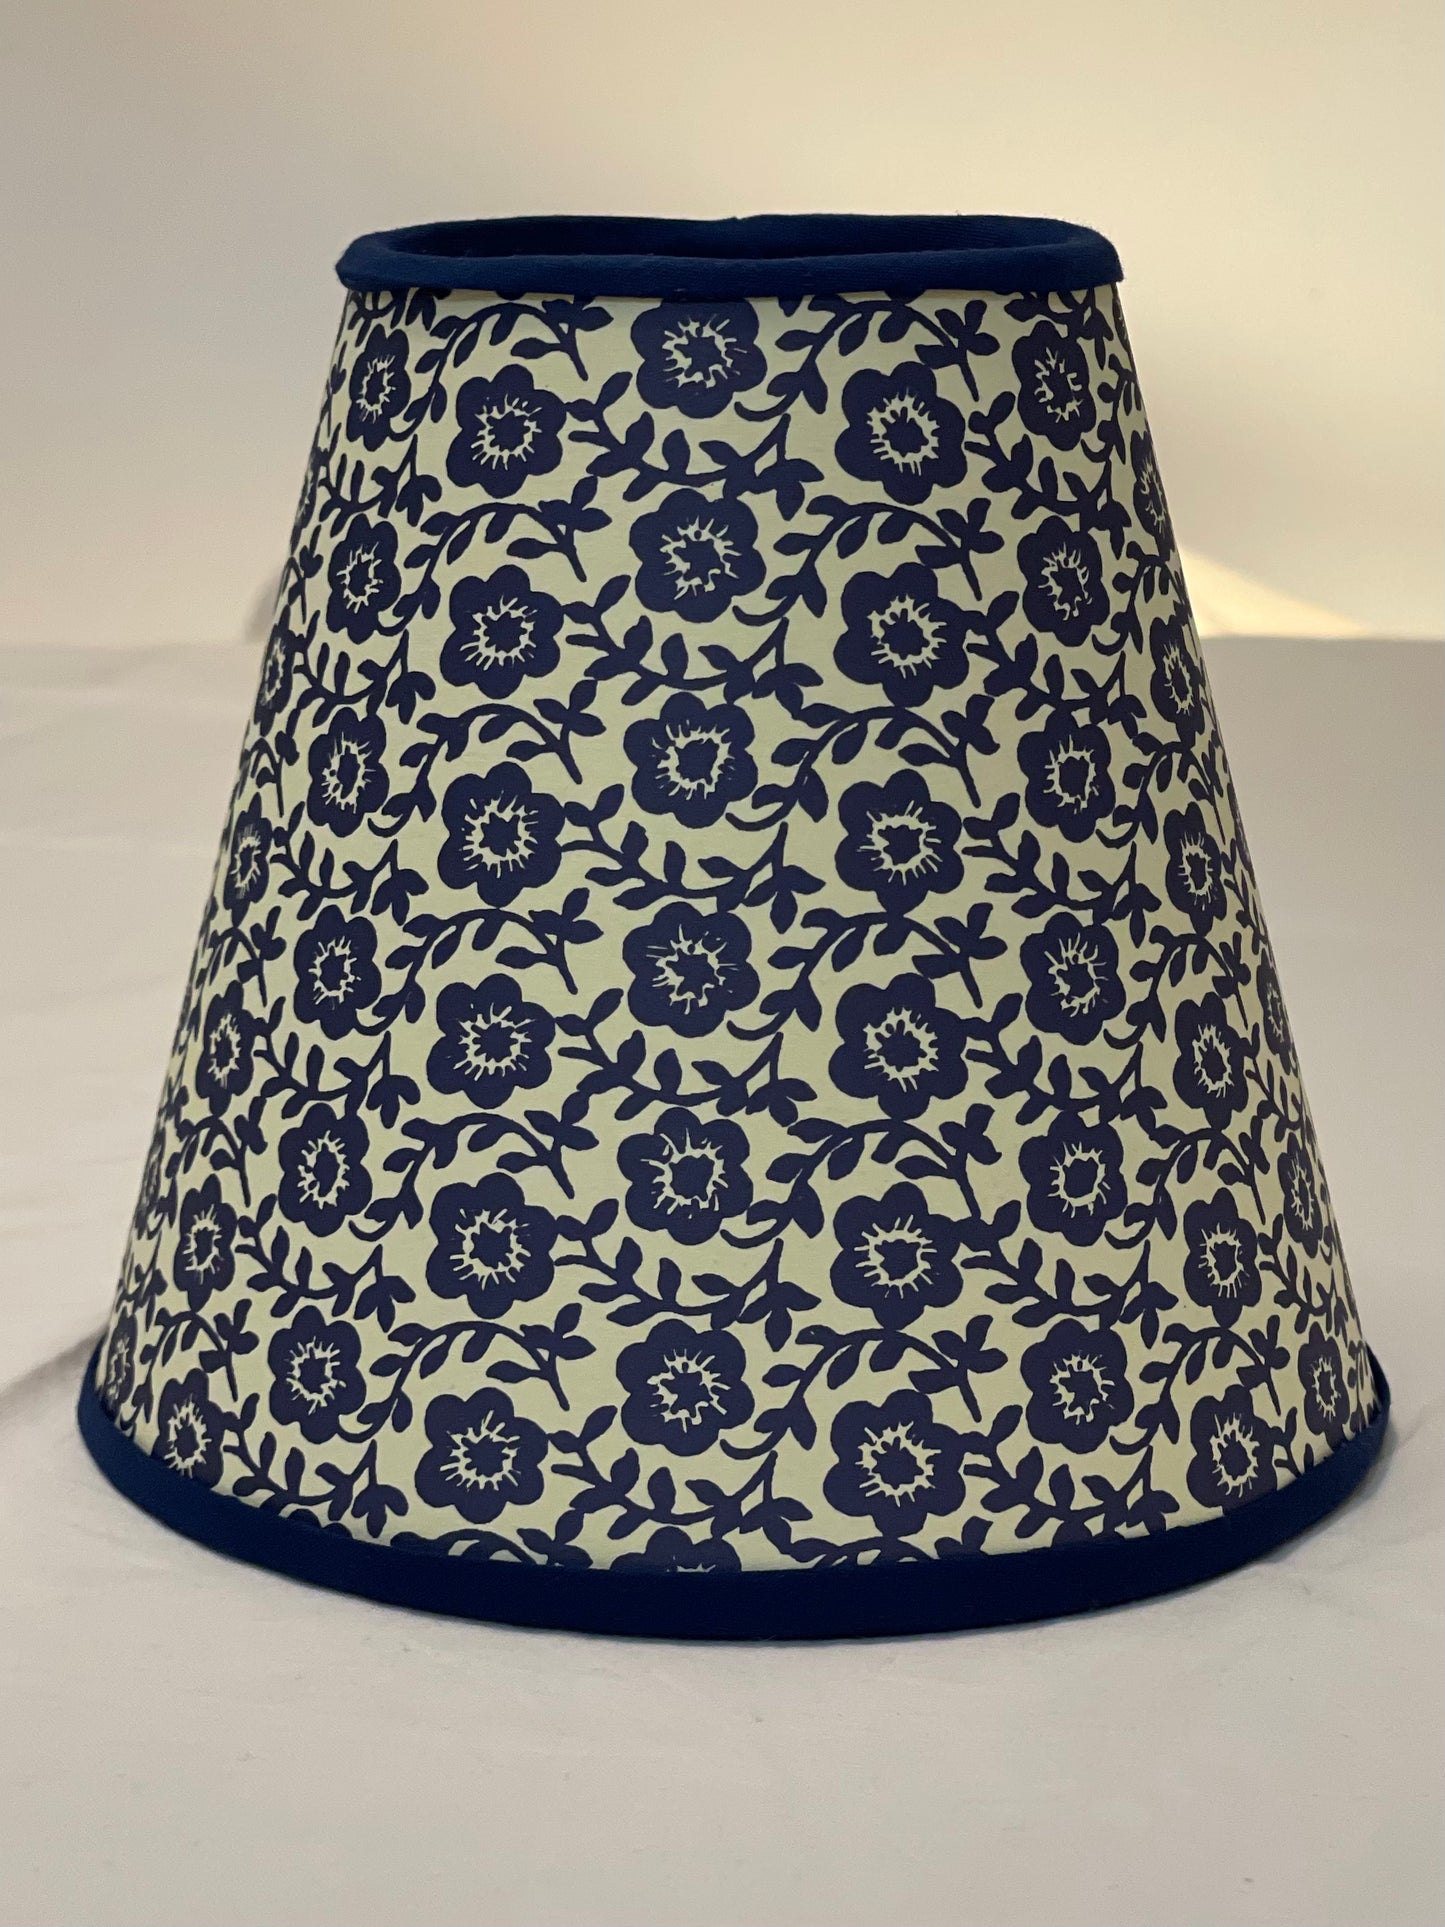 Small Clip-On Lampshade. Patterned Paper from Italy. Navy and Ecru Floral. Navy Trim.